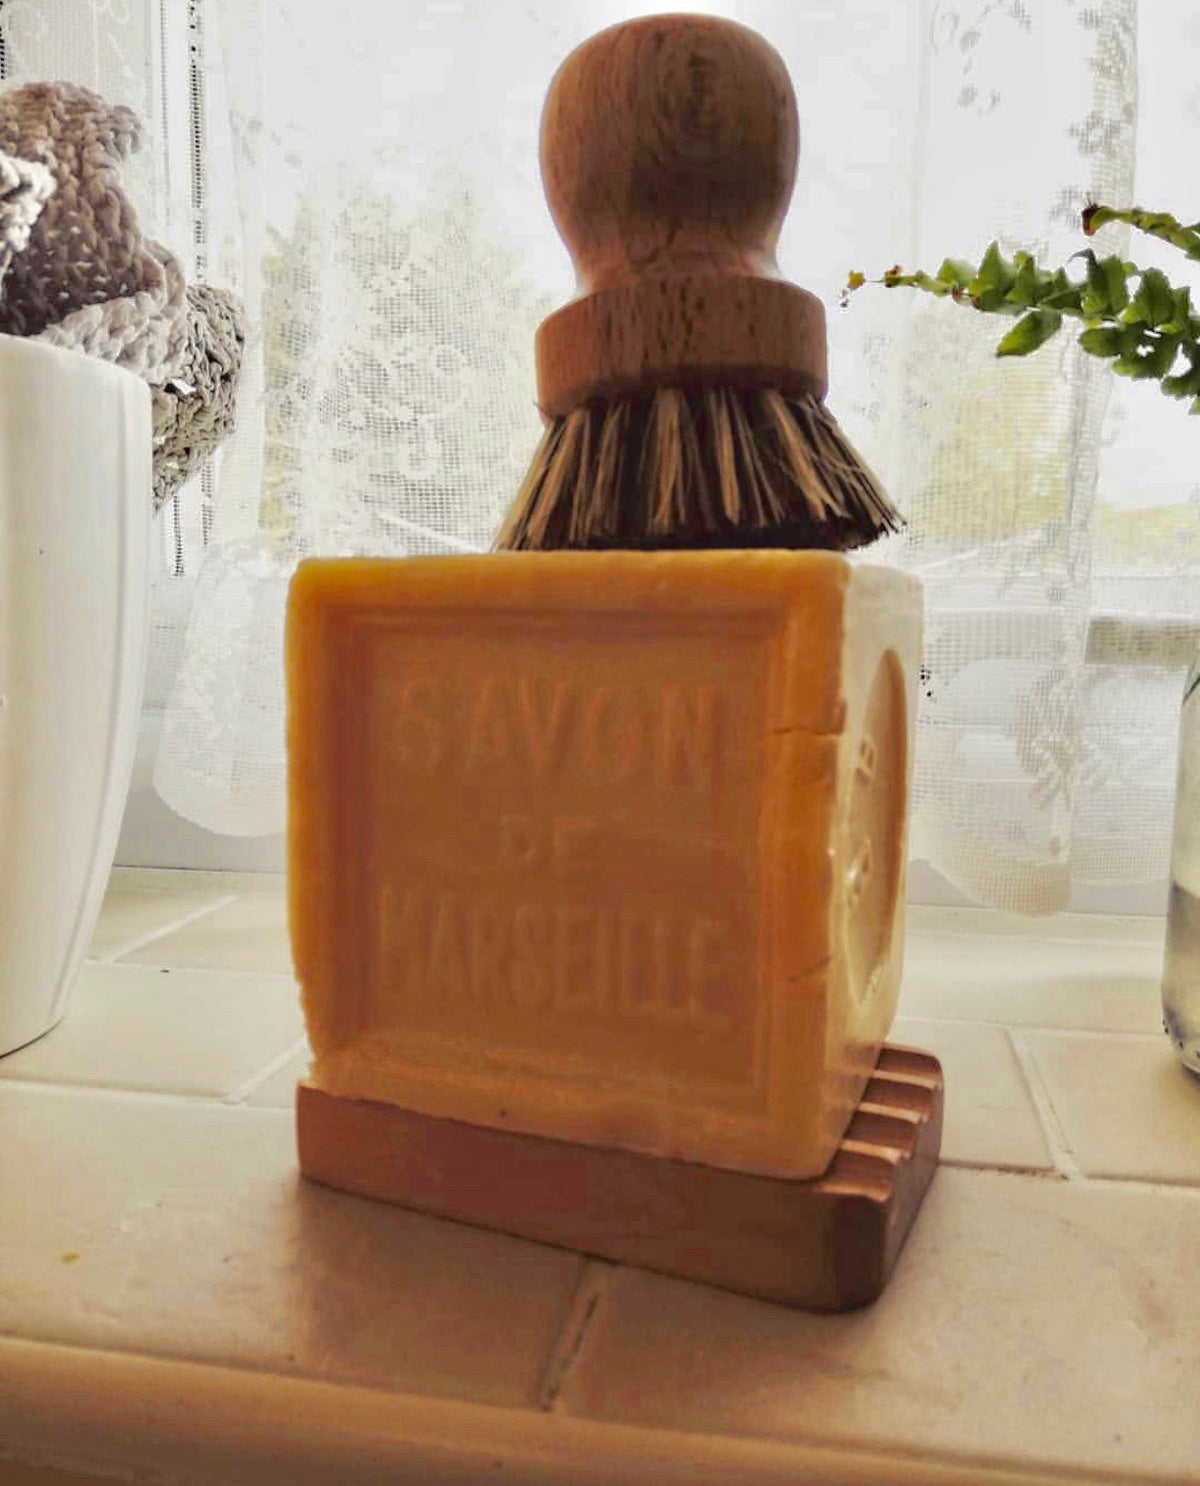 600g Savon De Marseille Traditonal French Soap Cube with Vegetable Oil 72%